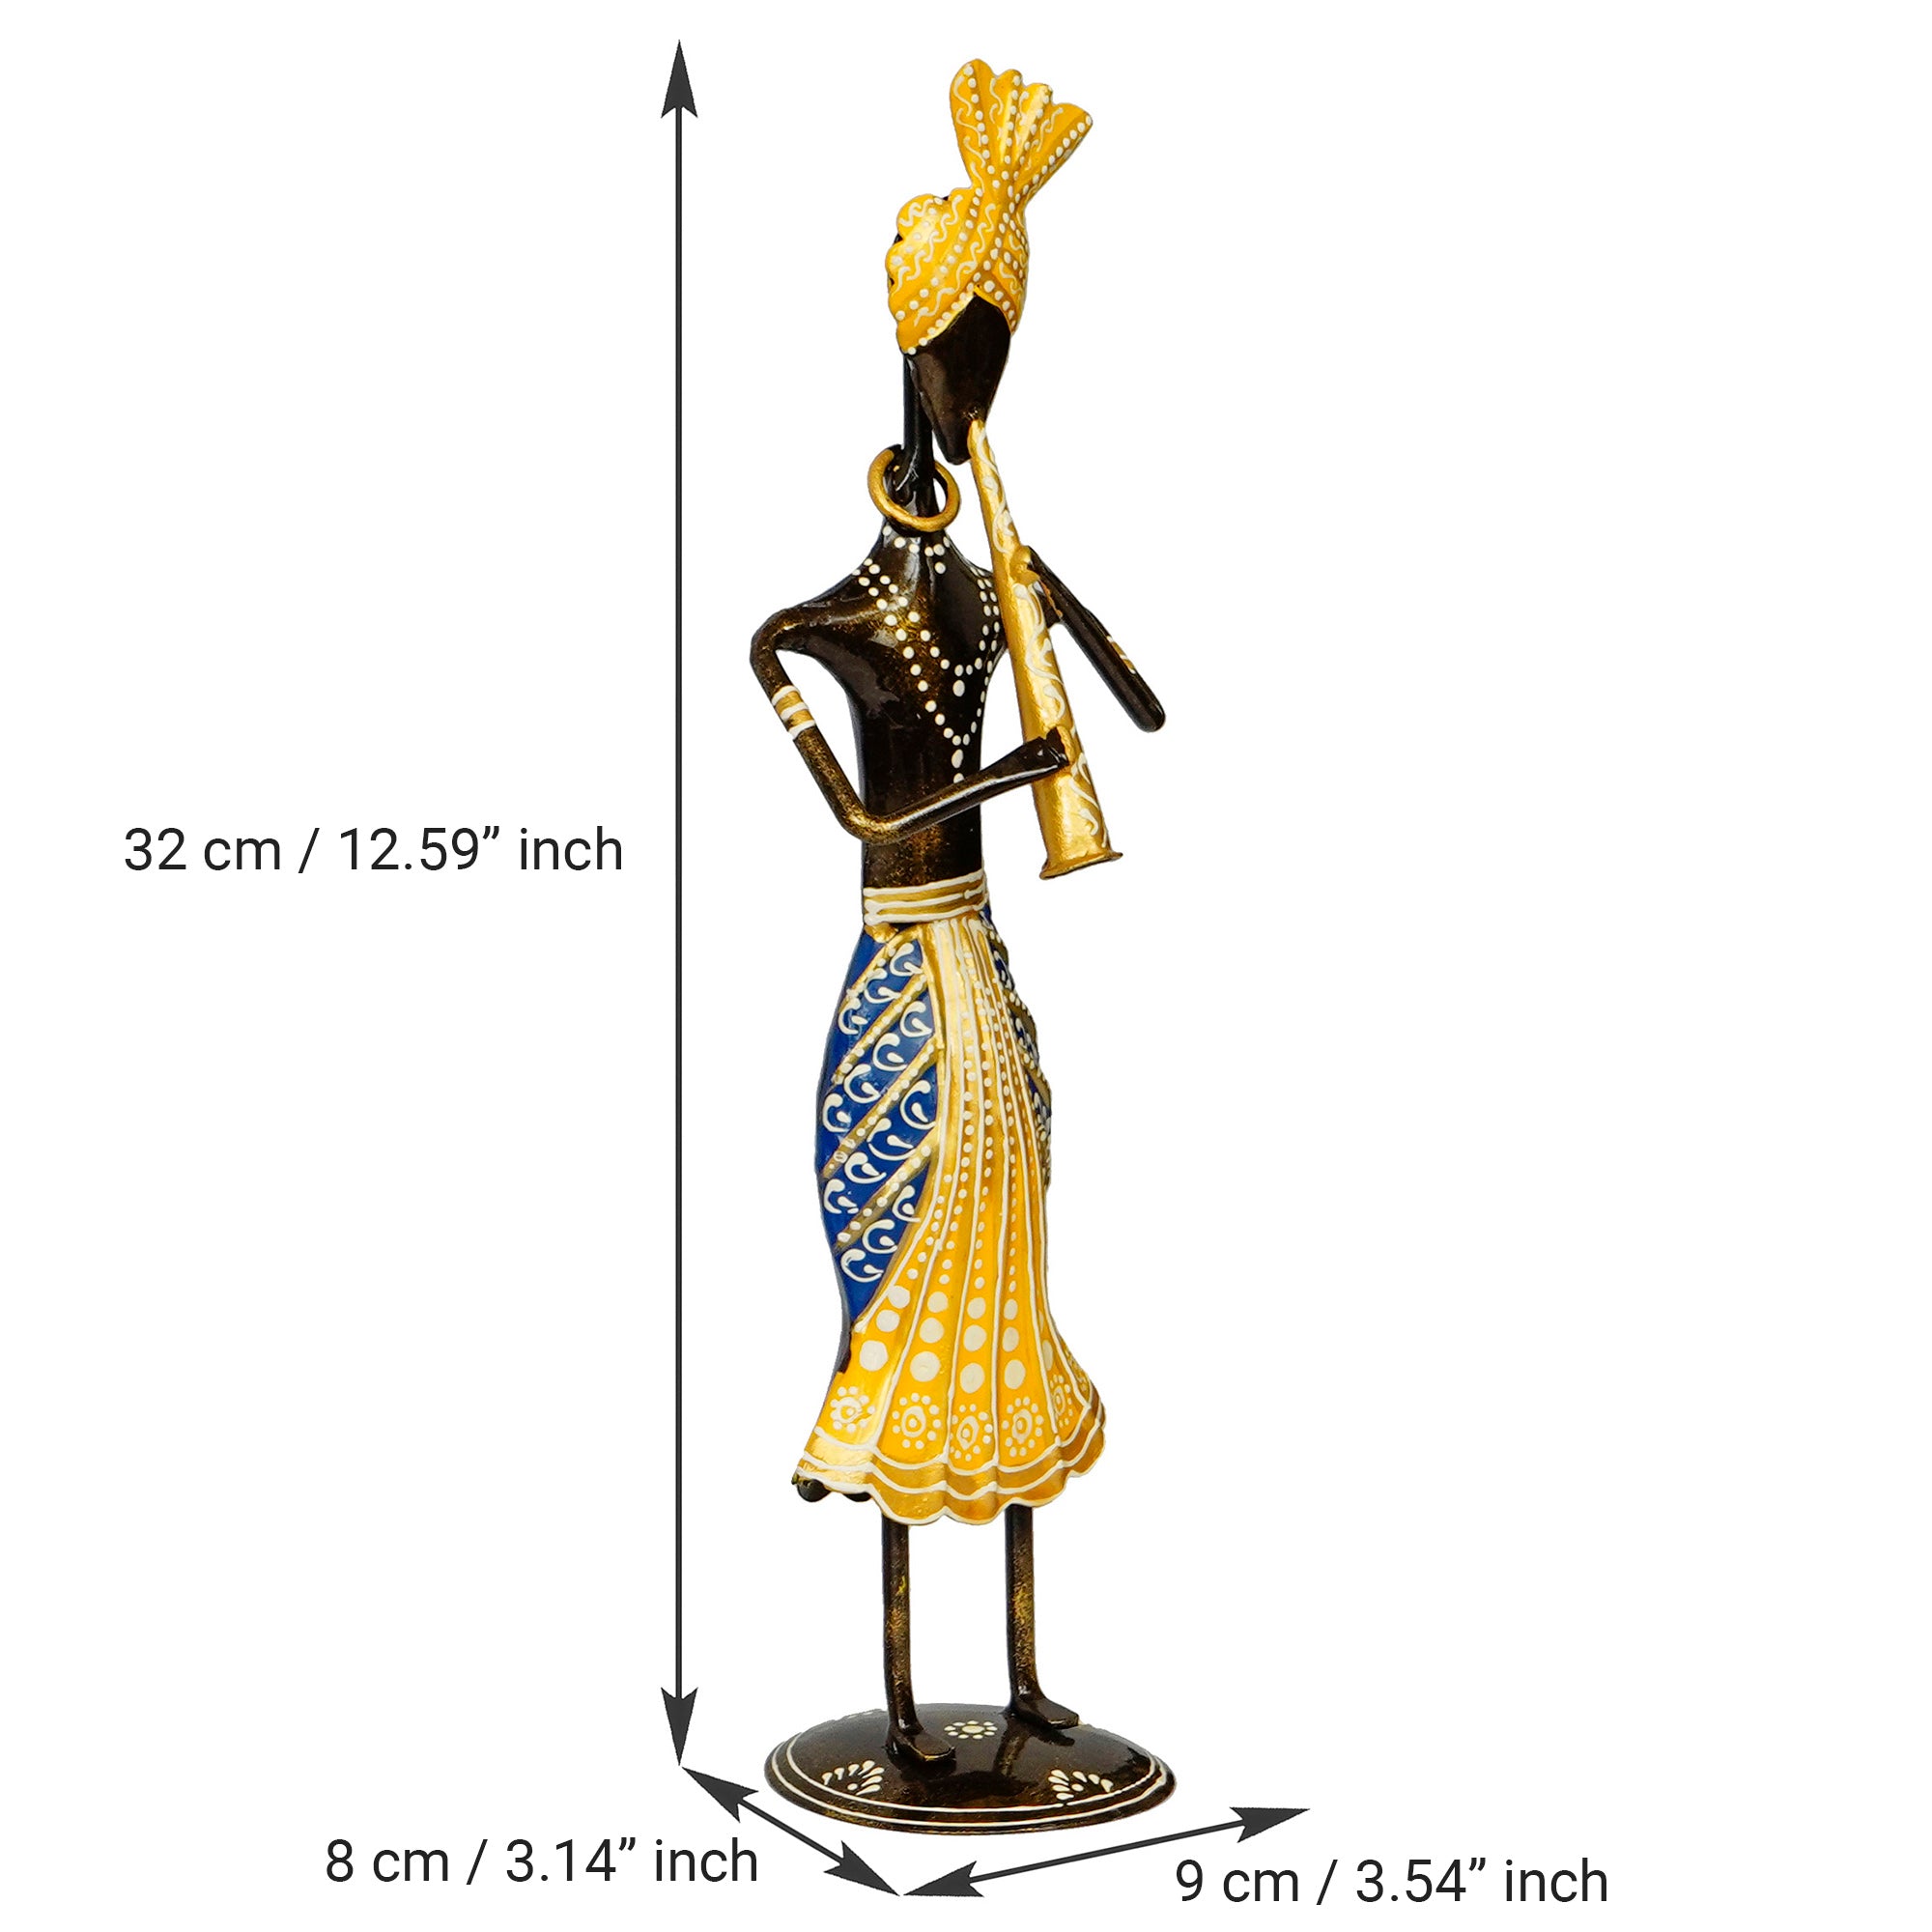 Iron Tribal Man Figurine Playing Trumpet Musical Instrument Decorative Showpiece (Black, Yellow and Blue) 3